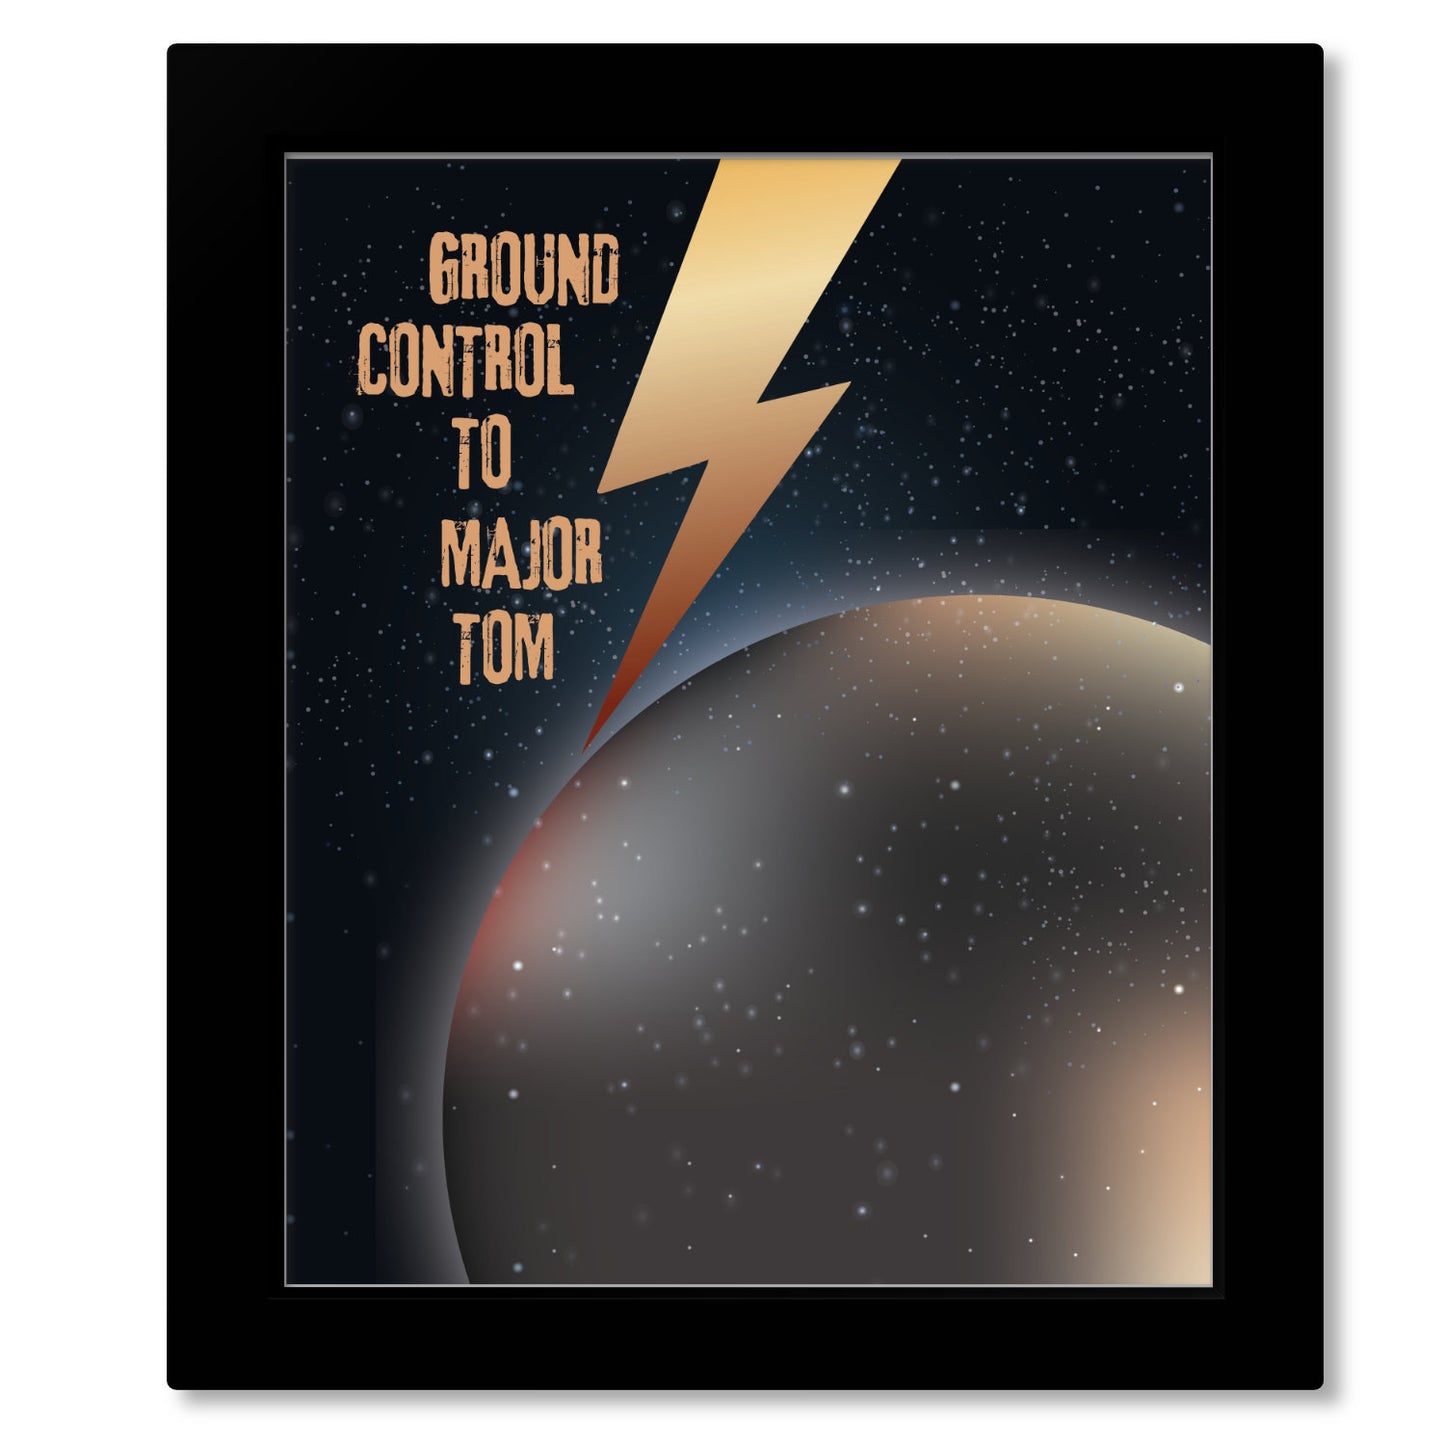 Space Oddity by David Bowie - Song Lyrics Art Print Quote